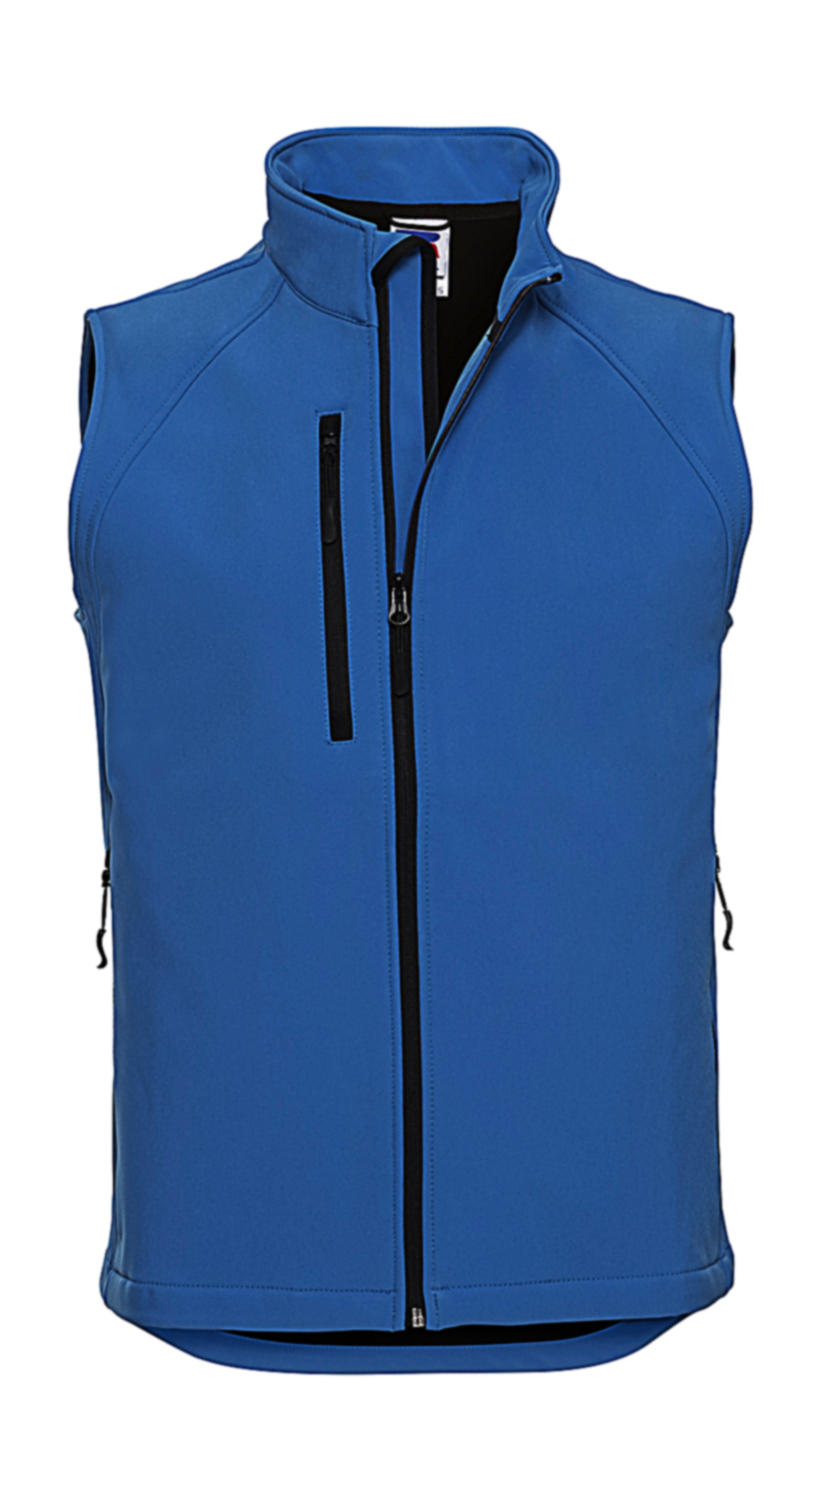  Softshell Gilet in Farbe Azure